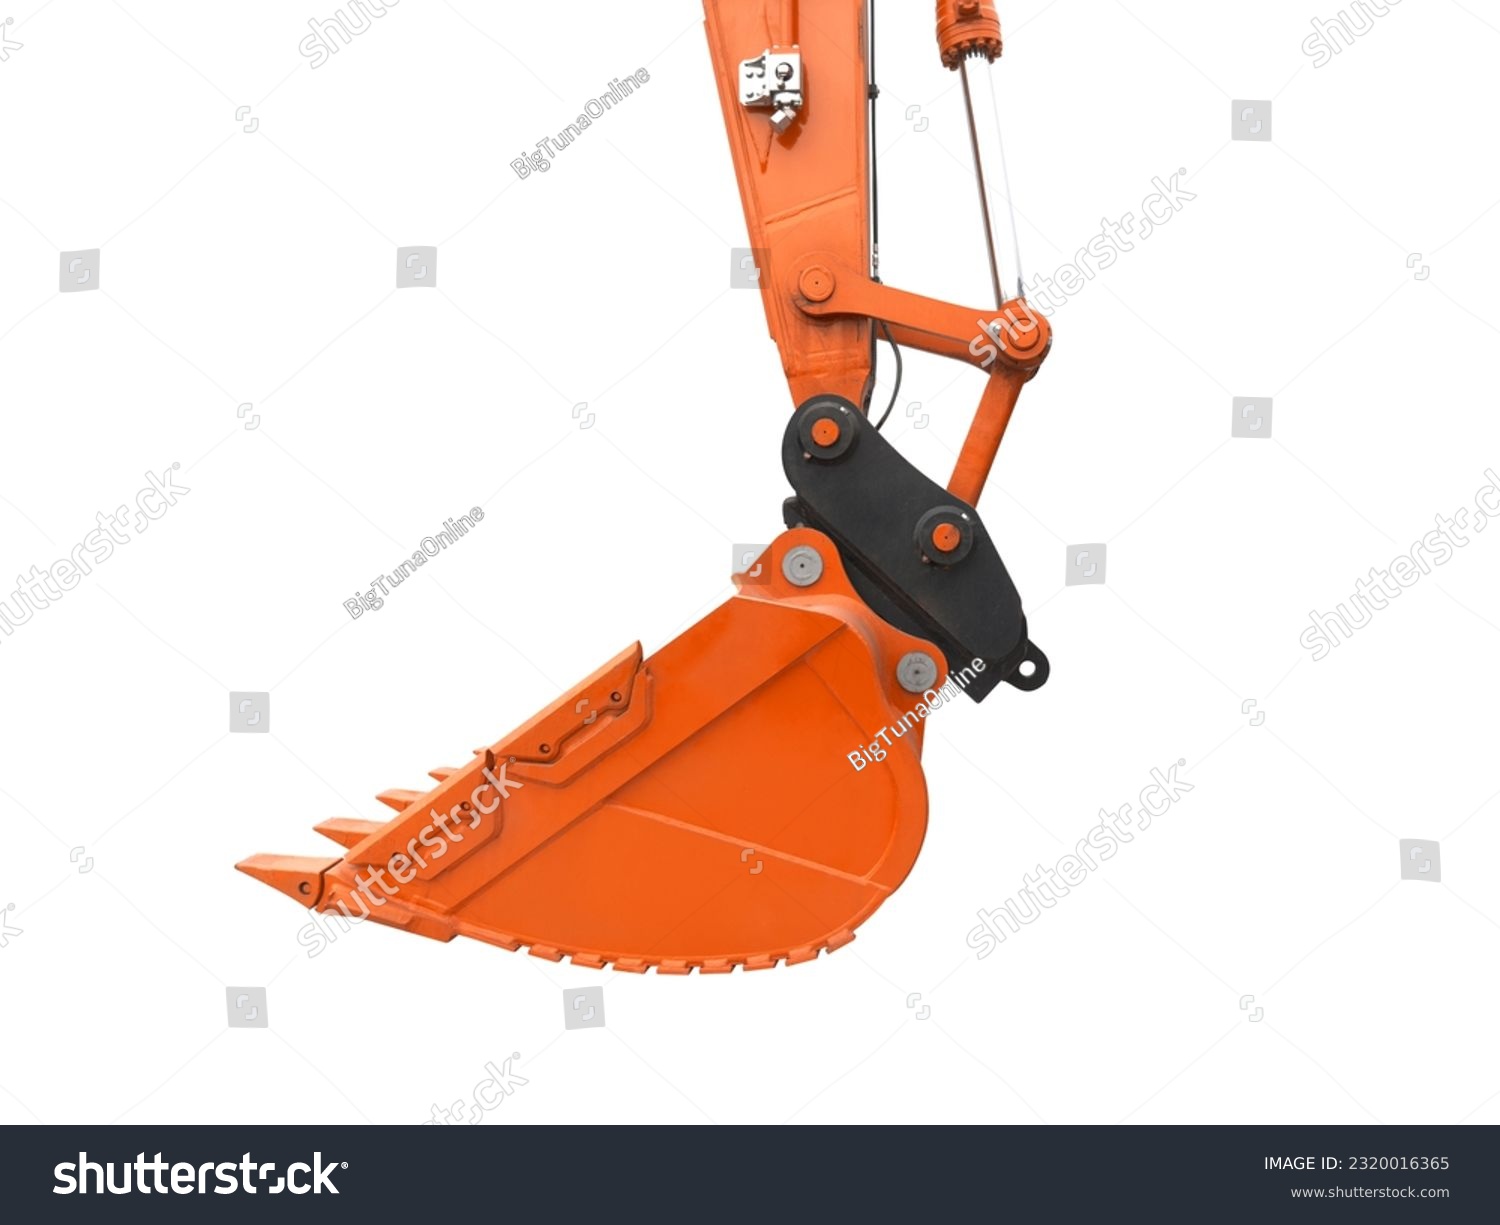 Crawler excavator with lift up bucket isolated on white background. Powerful excavator with an extended bucket close-up. Construction equipment for earthworks #2320016365